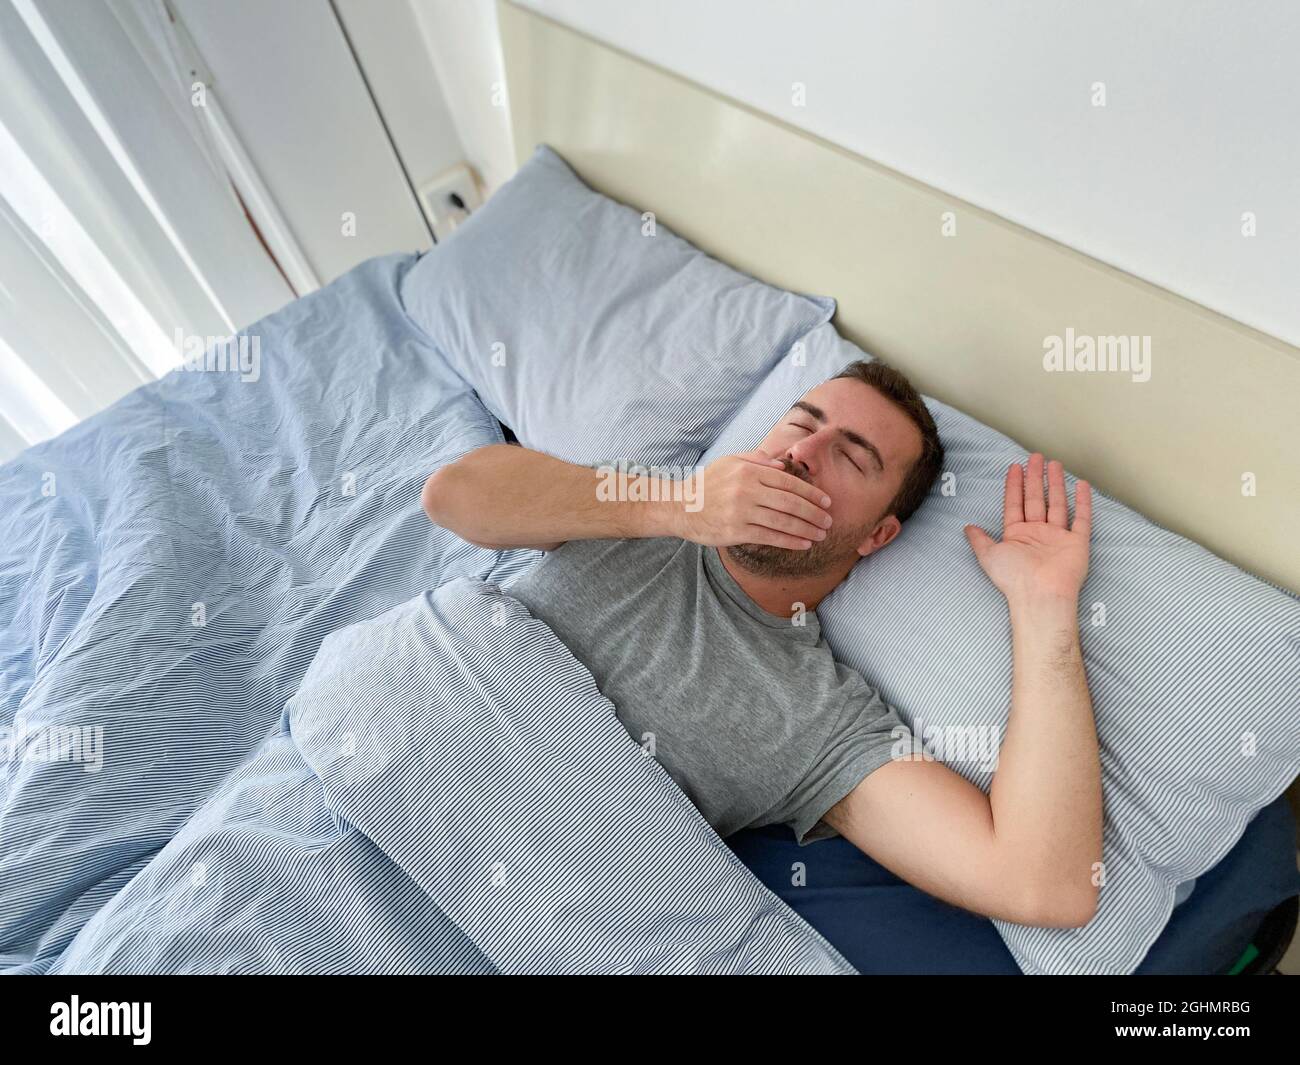 Tired man waking up early in the morning Stock Photo